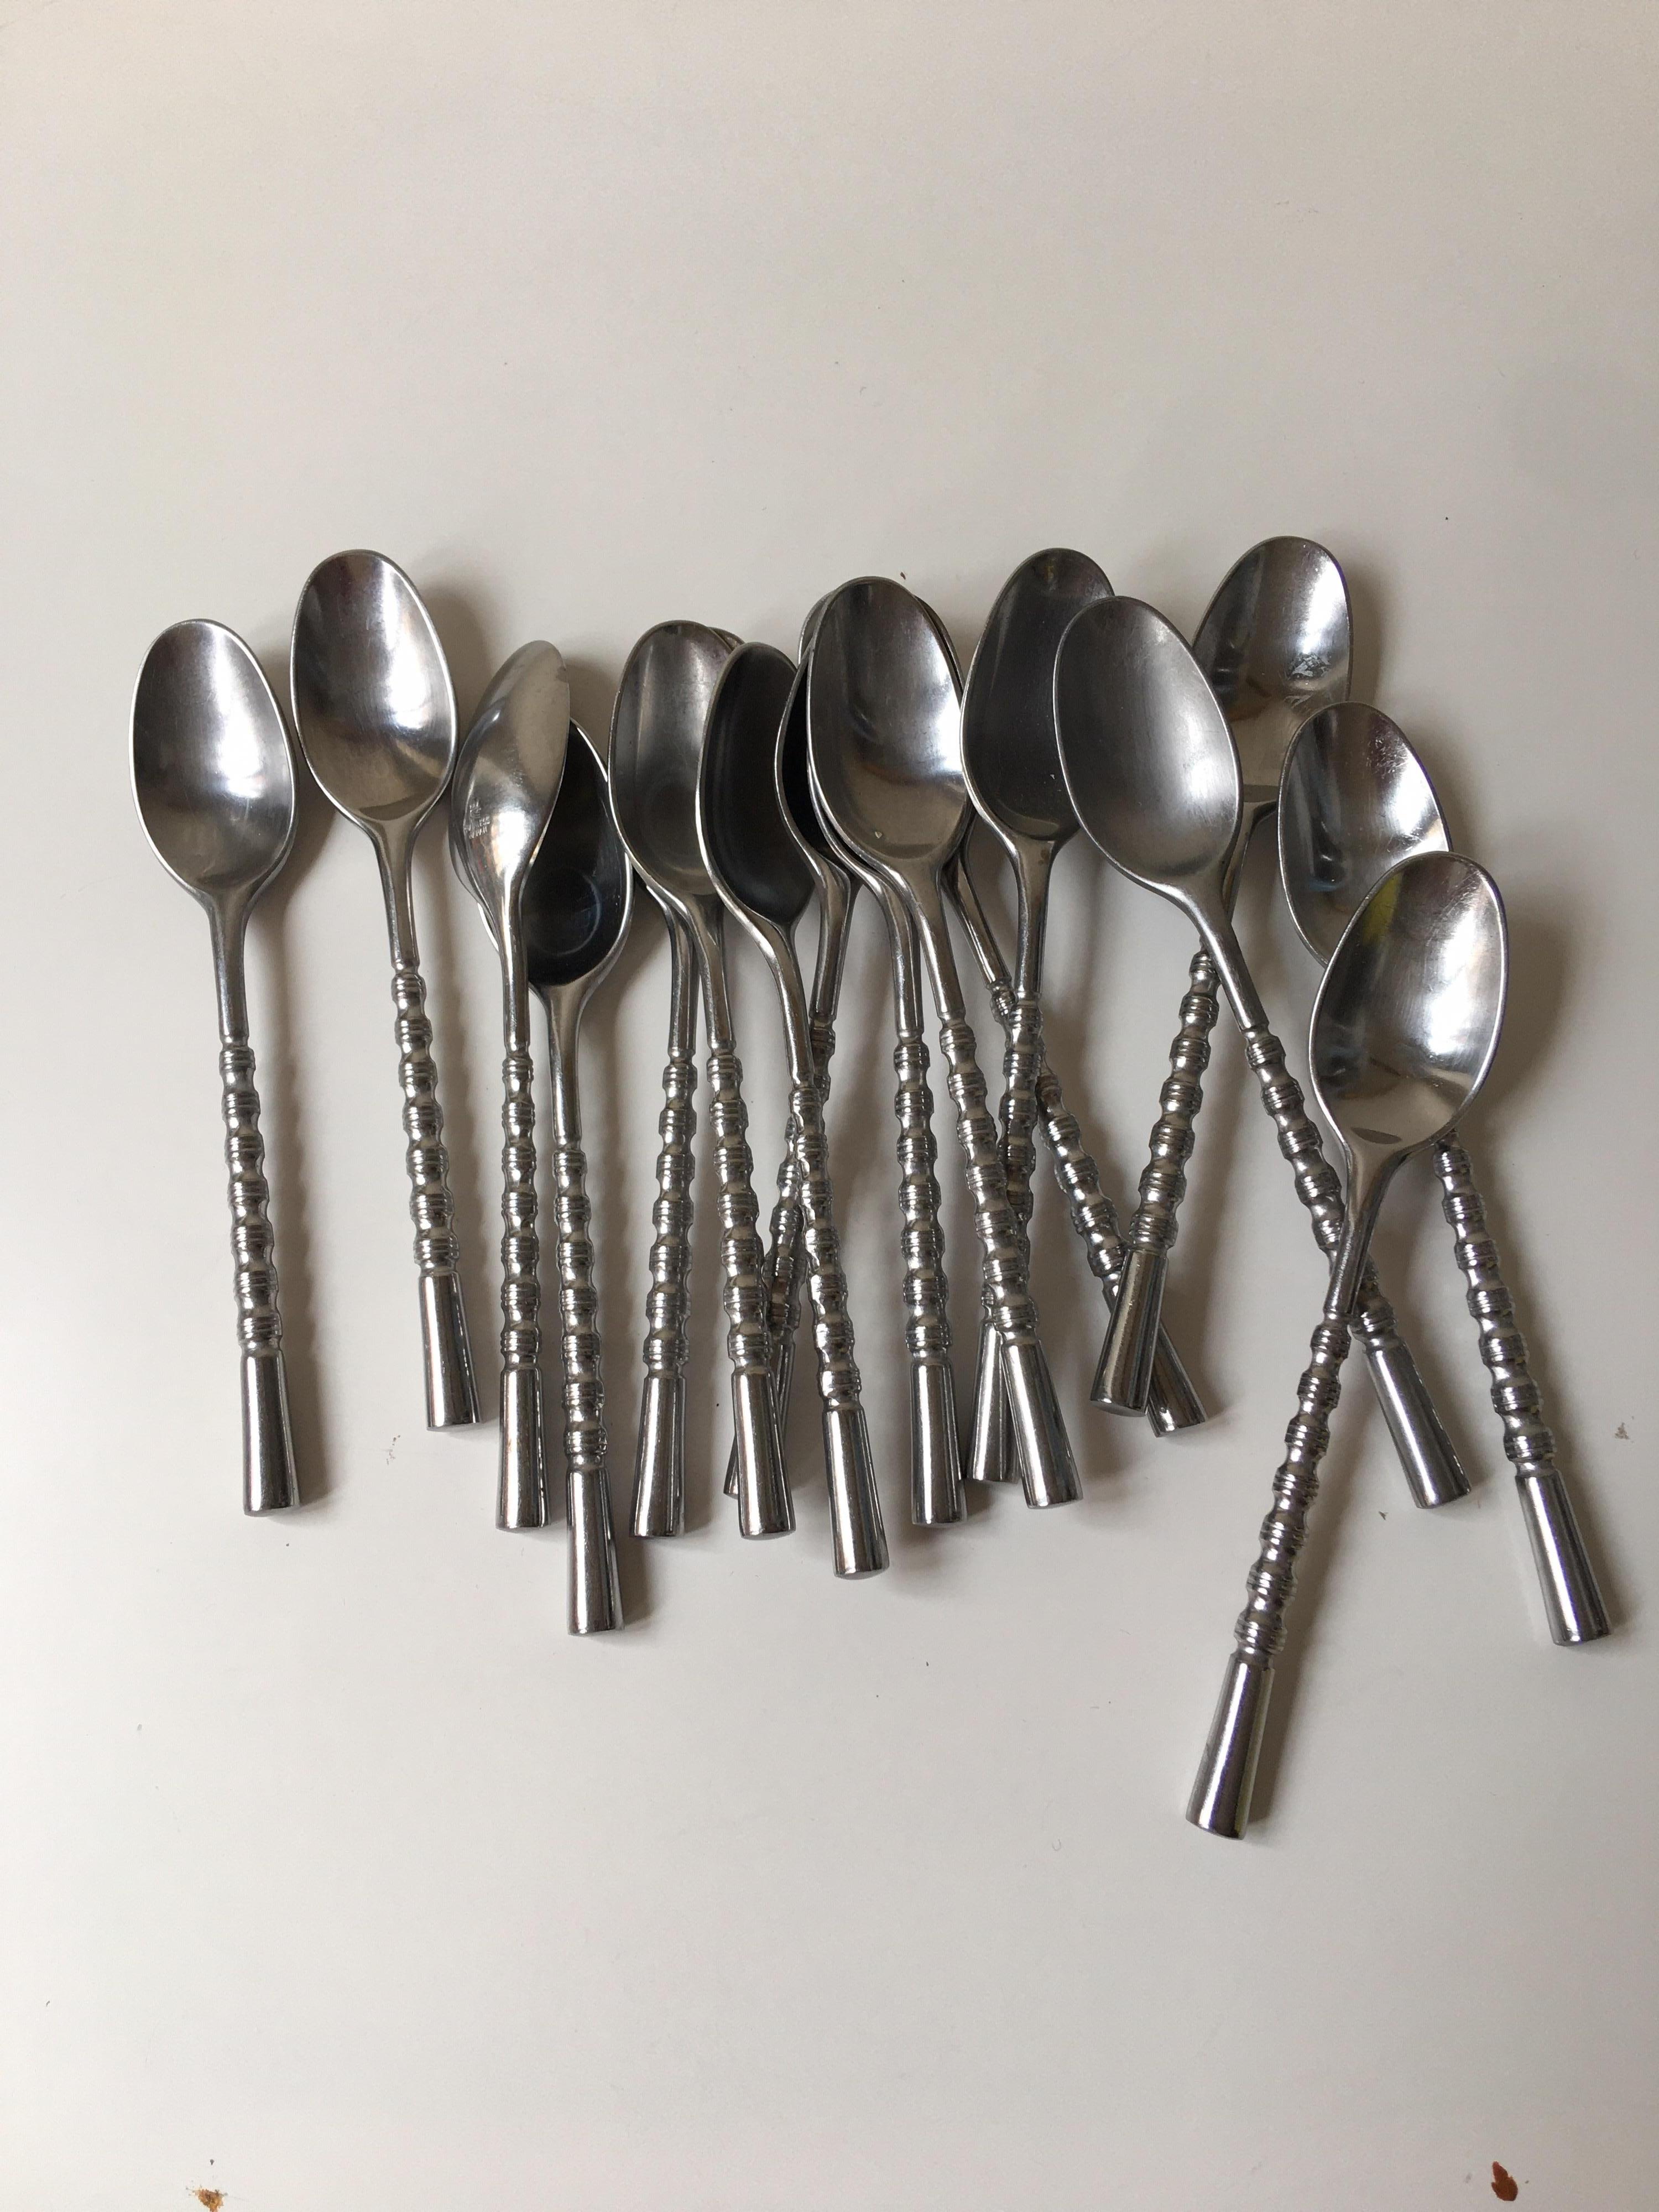 Mid-20th Century Stanley Roberts Service for 8 Mid-Century Modern Flatware Set 50 Pieces.